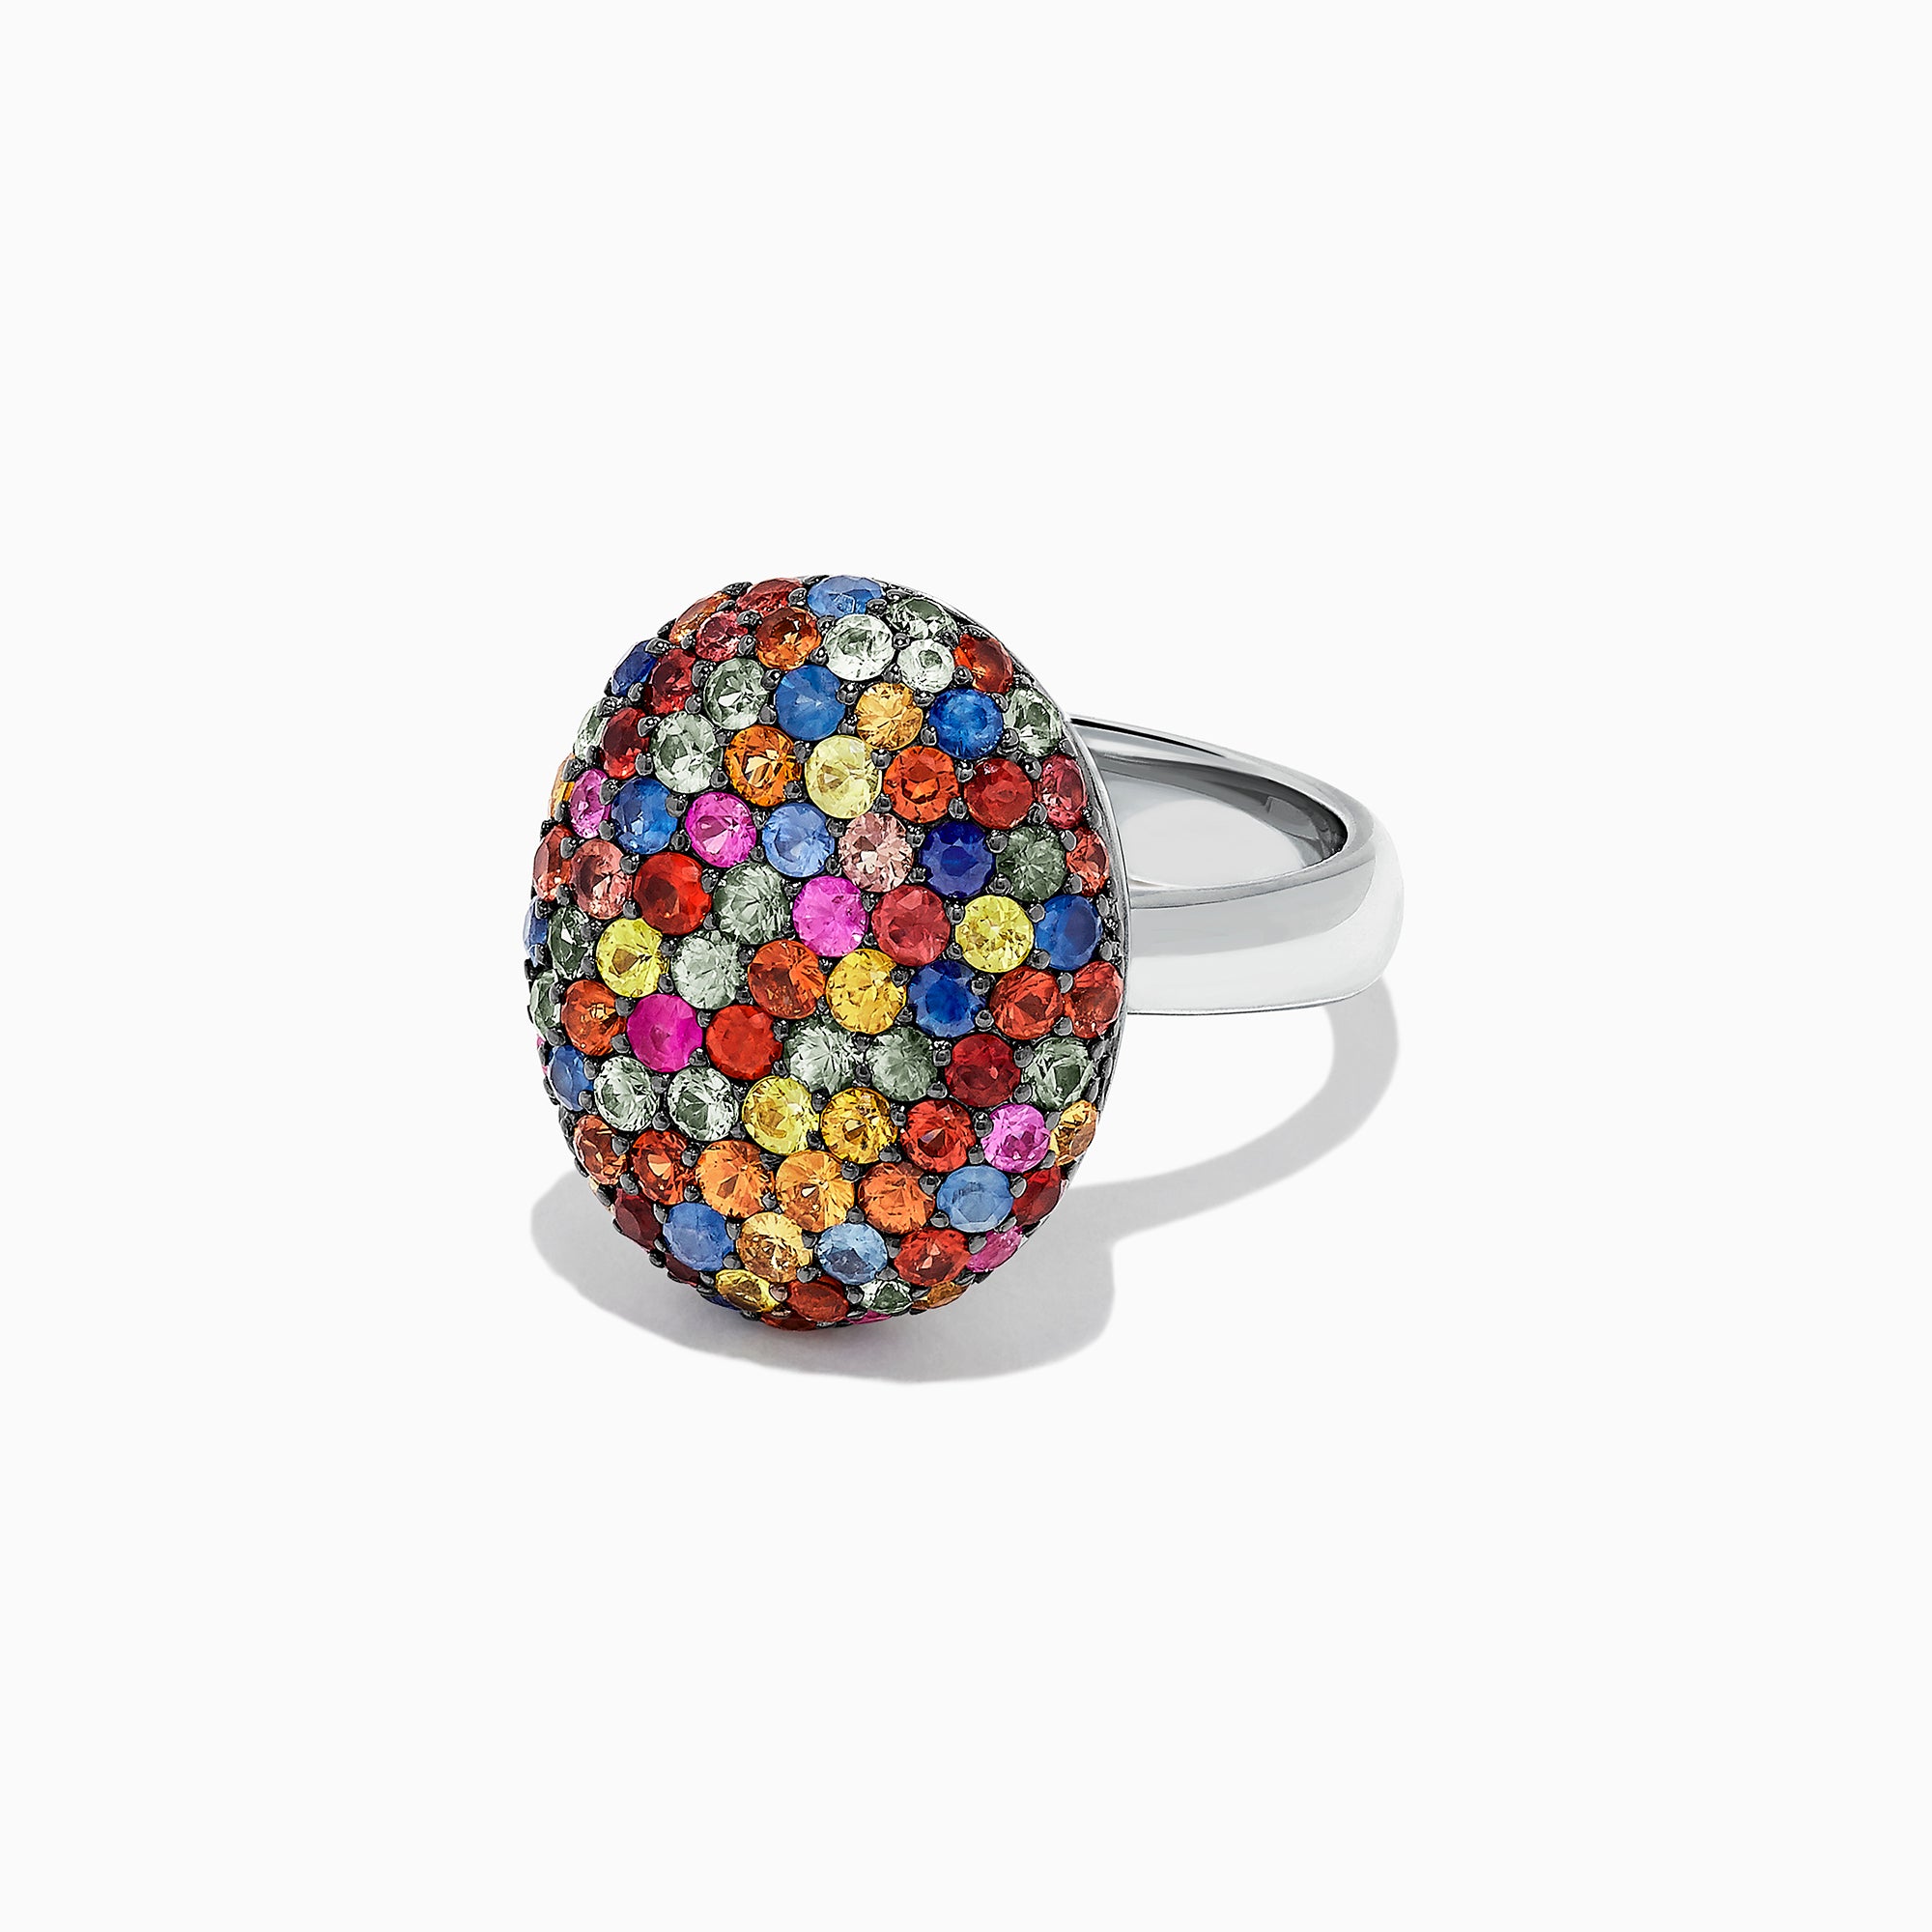 Pmuybhf Mother's Day Colorful Oval Couple Ring Egg Shaped Ring European and American Simple Colorful Ring Men's Rings Silver with Stone Rings for